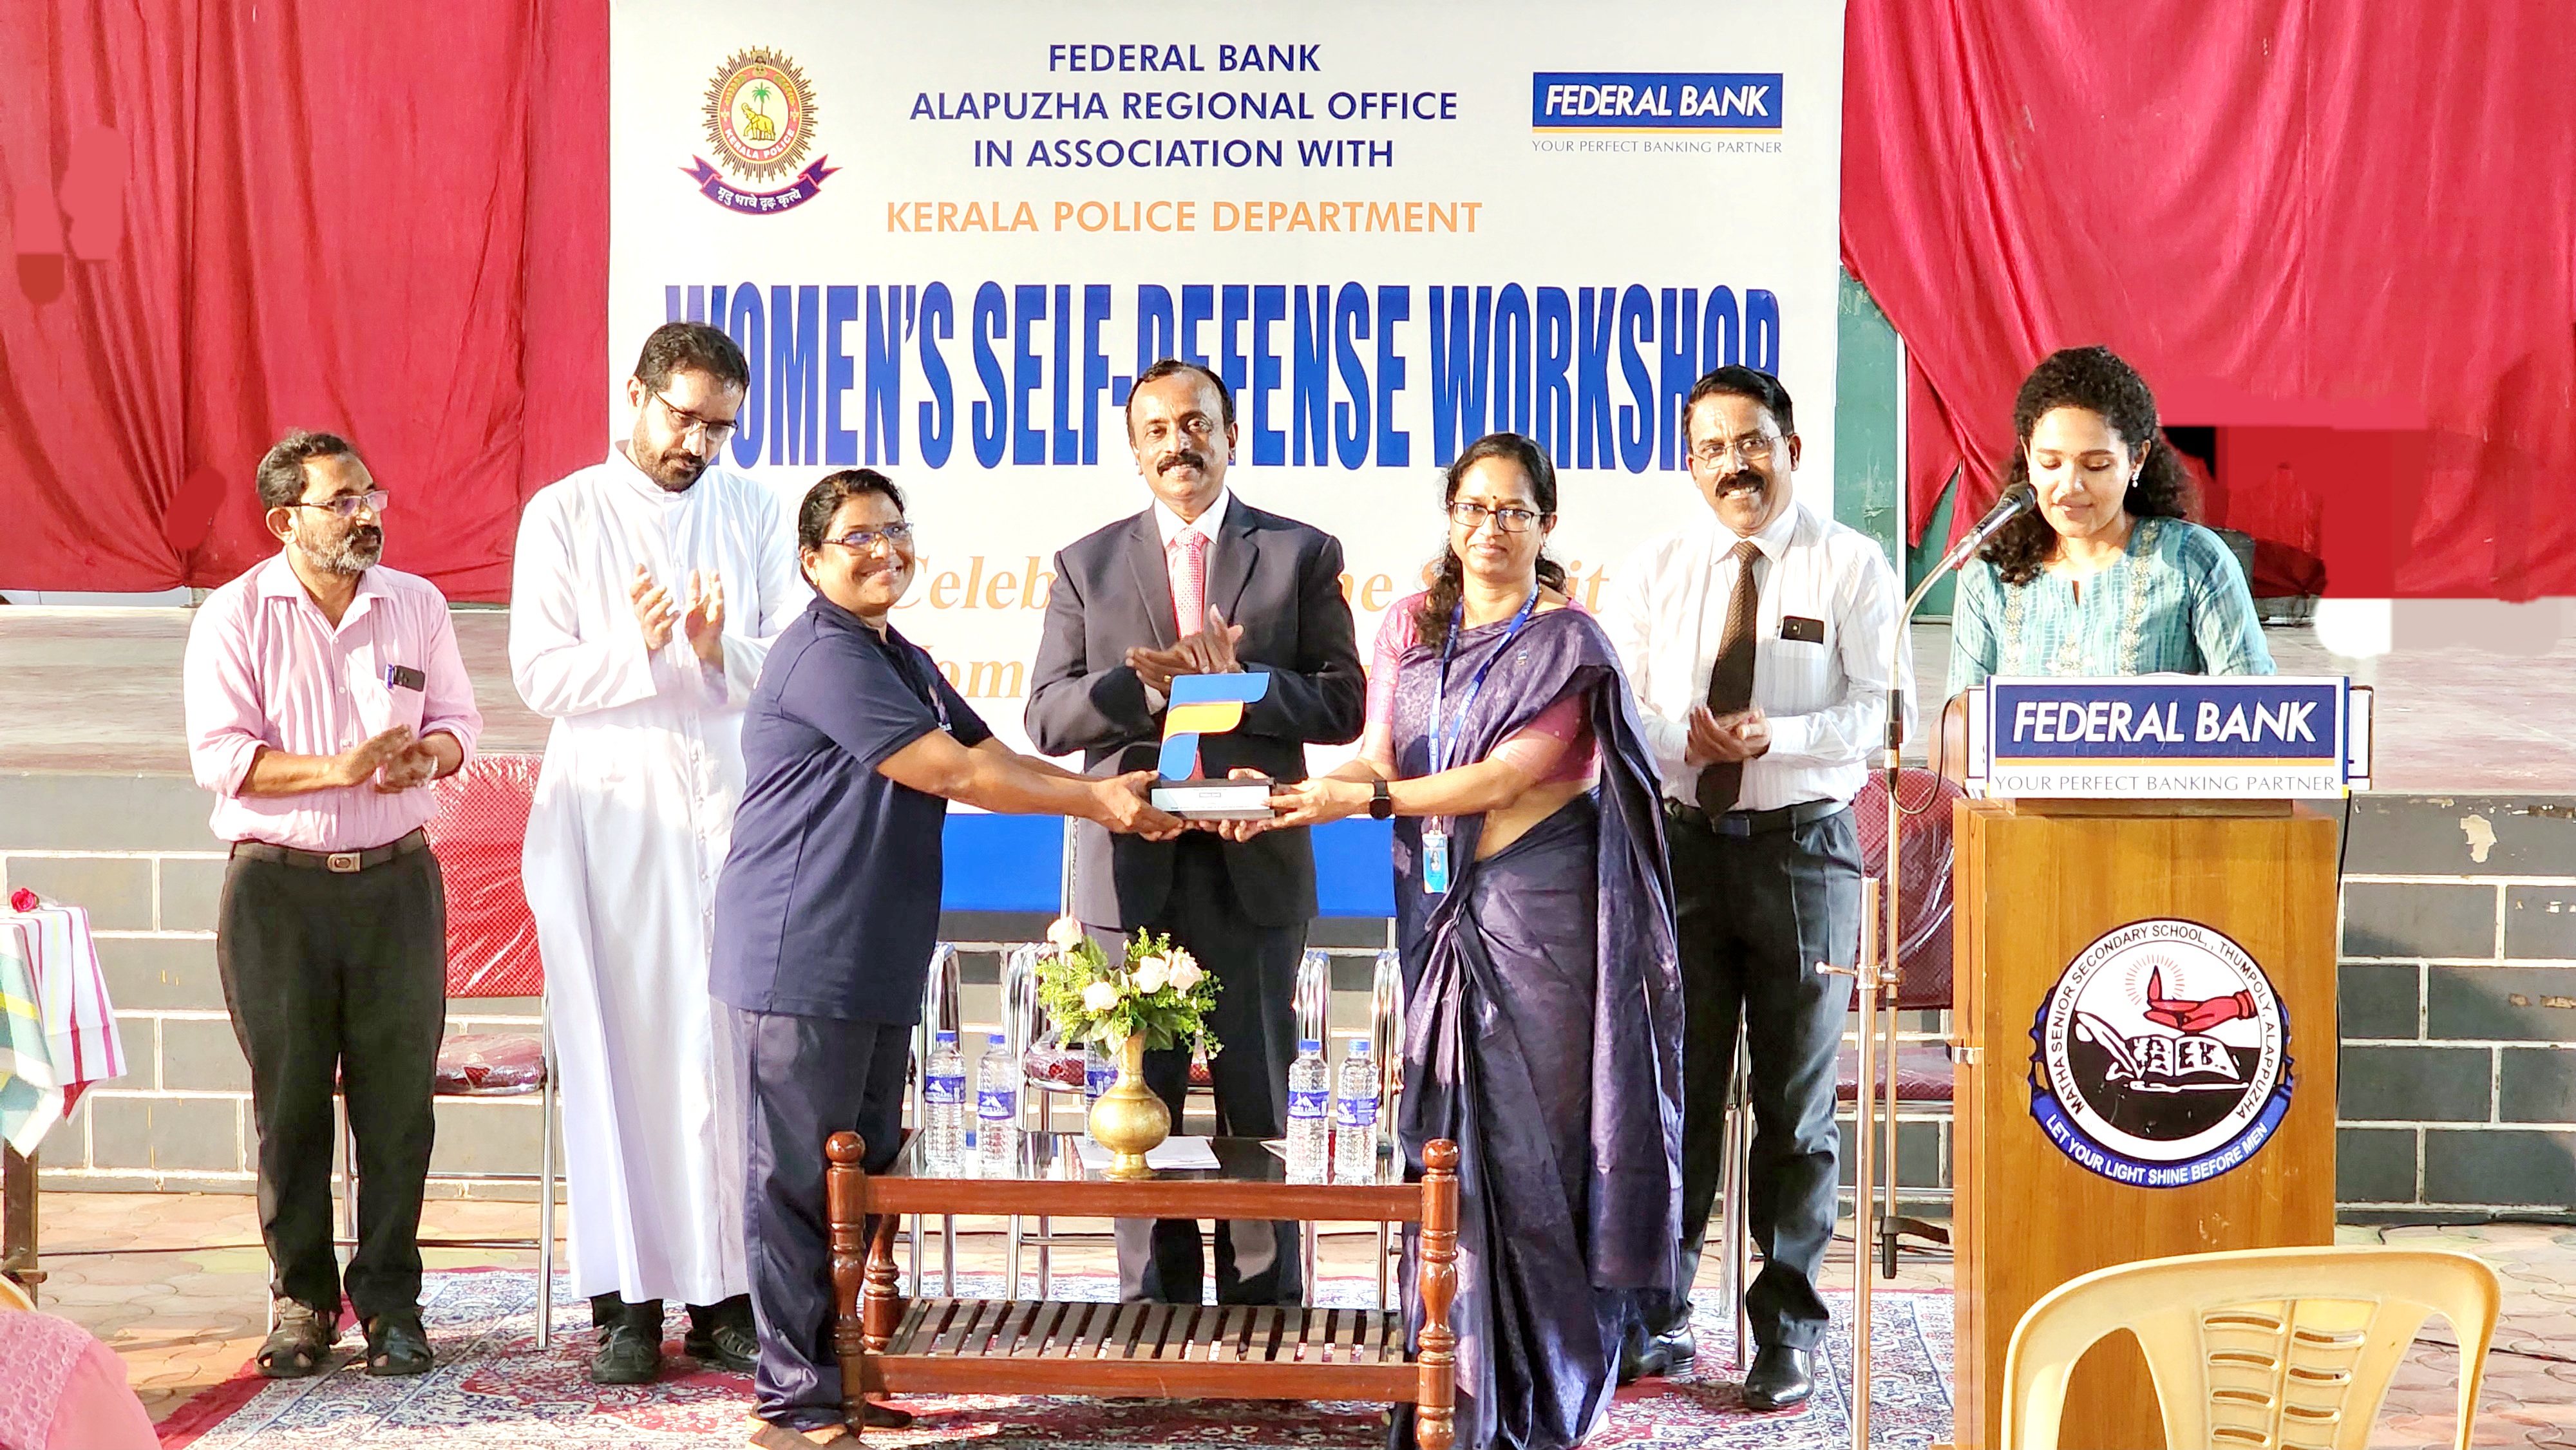 Federal Bank conducts self-defense training for women employees in association with Kerala Police